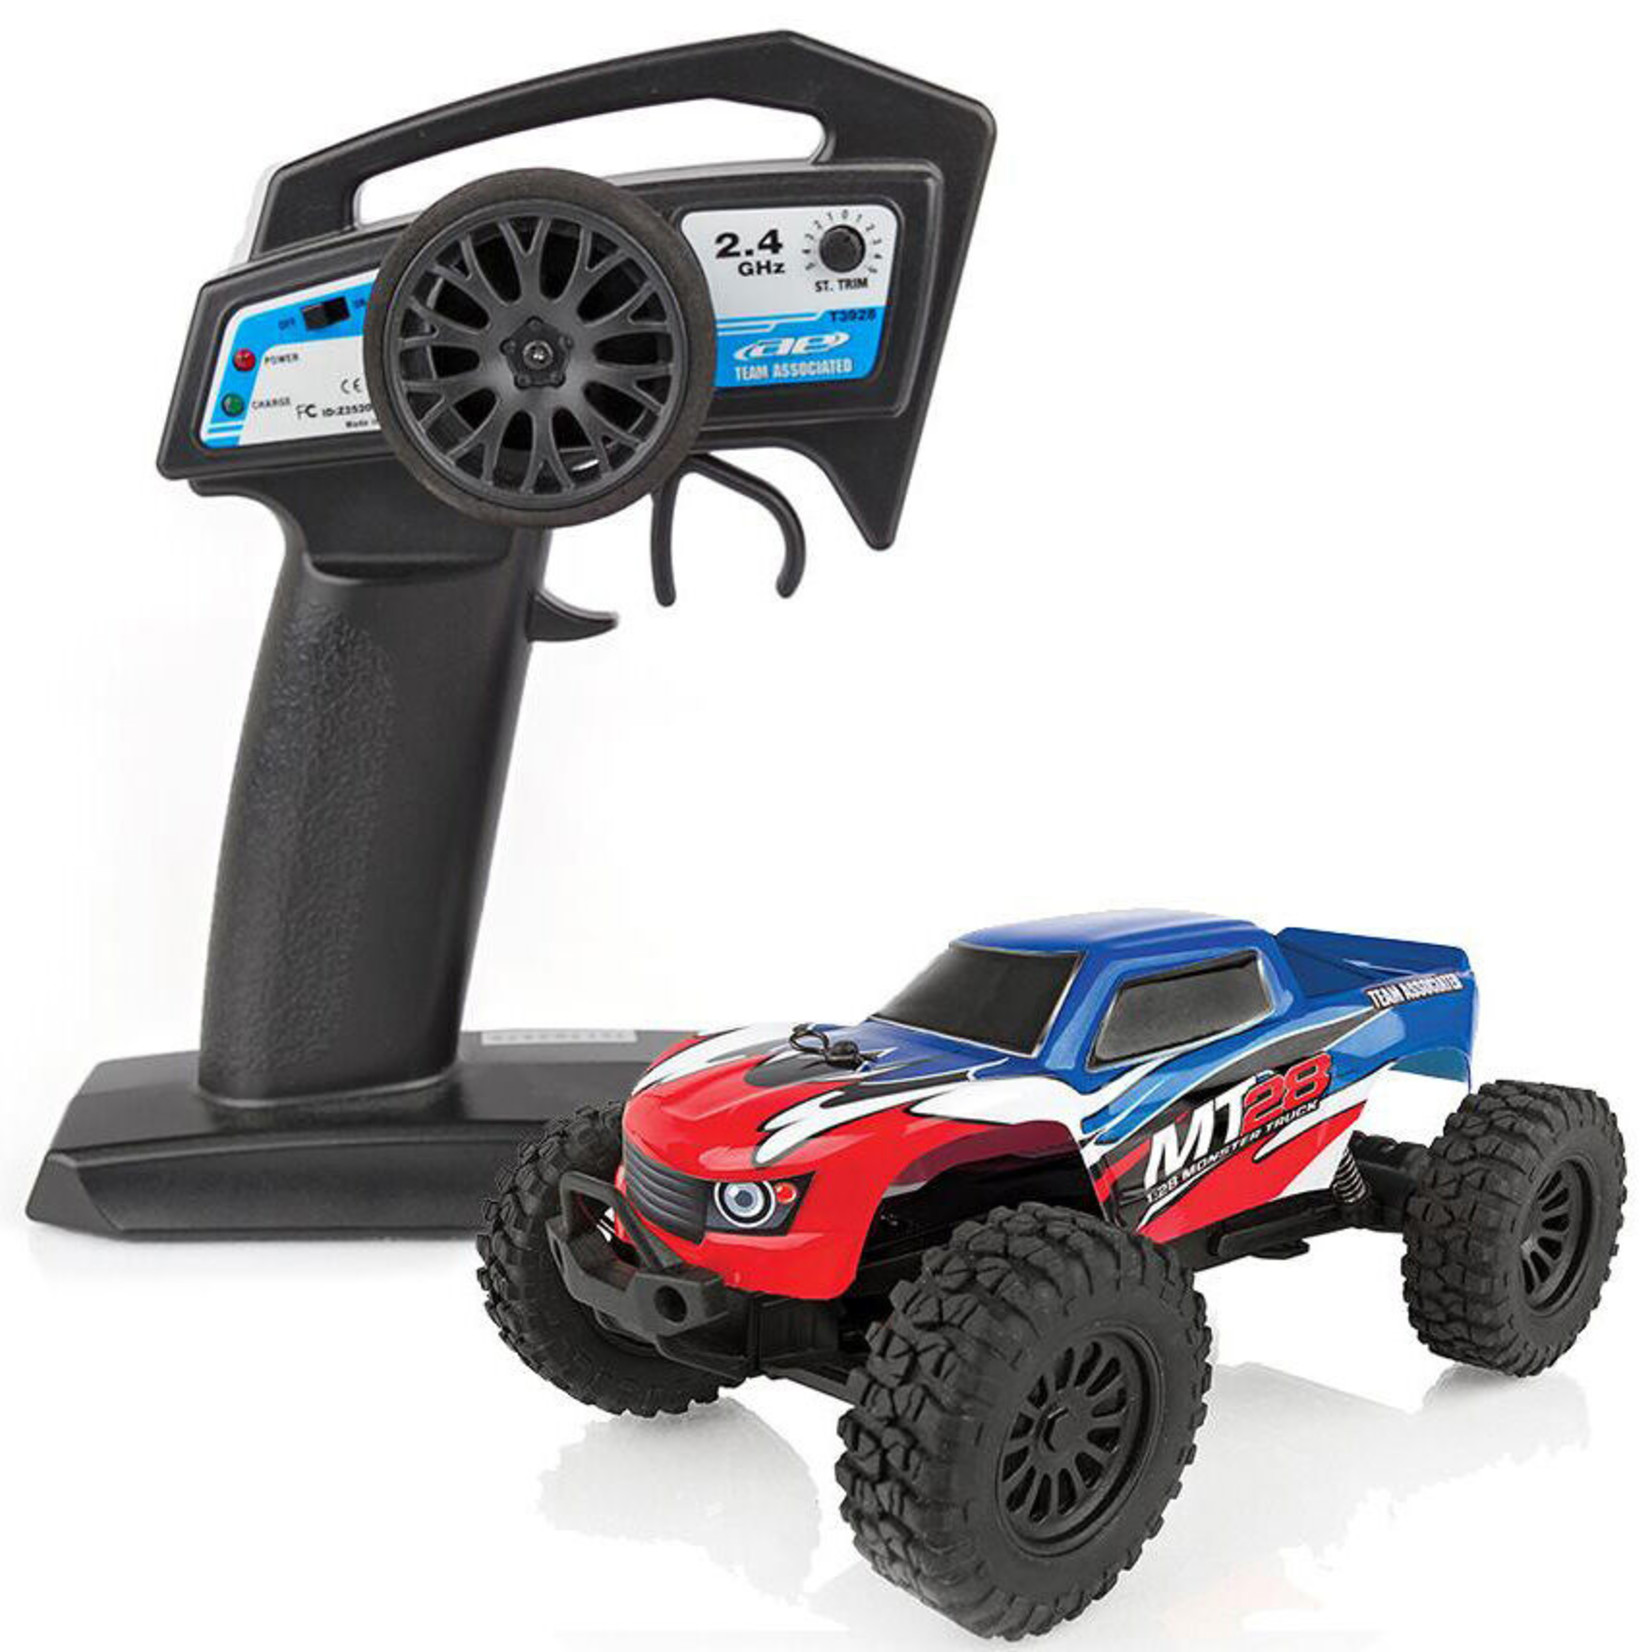 Team Associated 1/28 2WD MT28 Monster Truck Brushed RTR